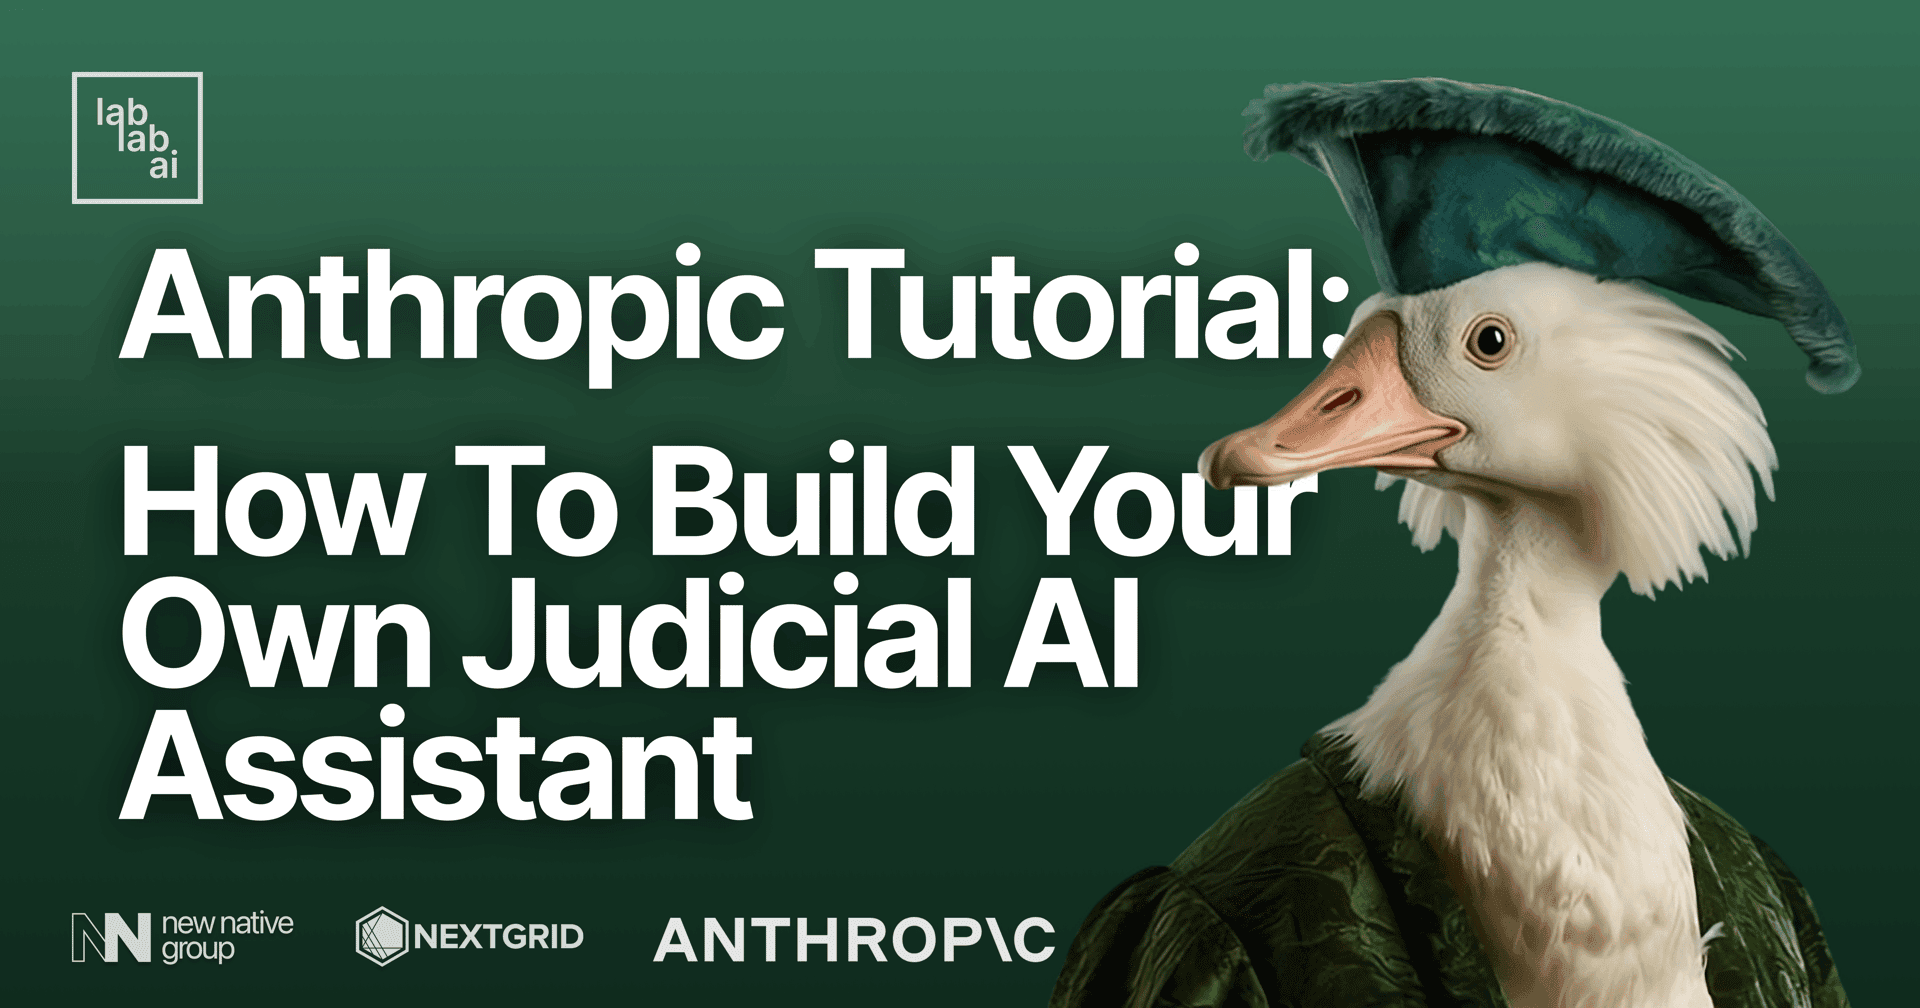 Anthropic tutorial: How to build your own Judicial AI Assistant